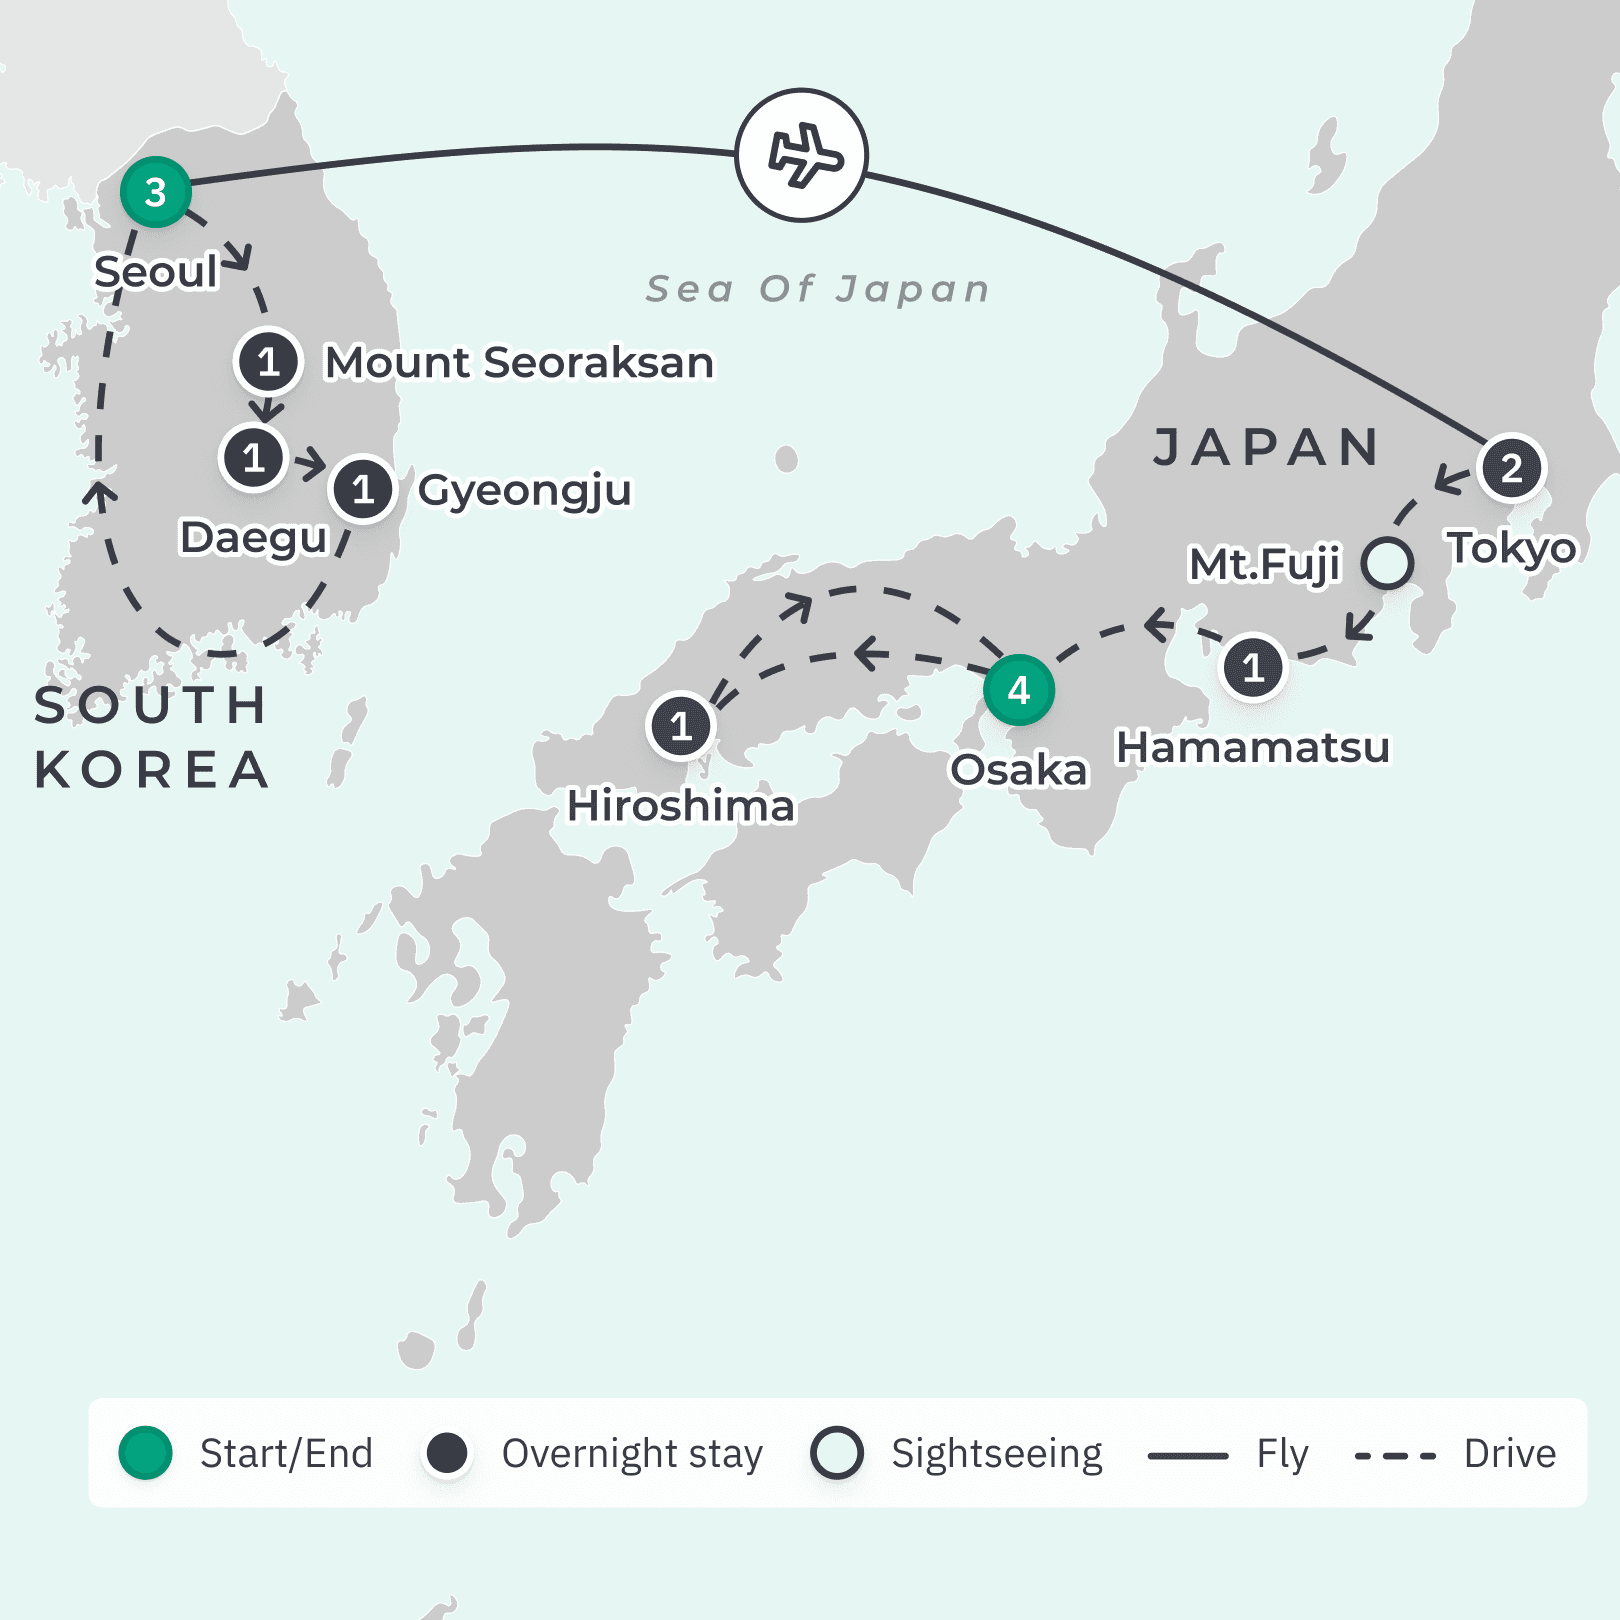 South Korea & Japan Tour with Kyoto Bullet Train, UNESCO Sites, Mount Fuji & Cherry Blossom Dates Available route map